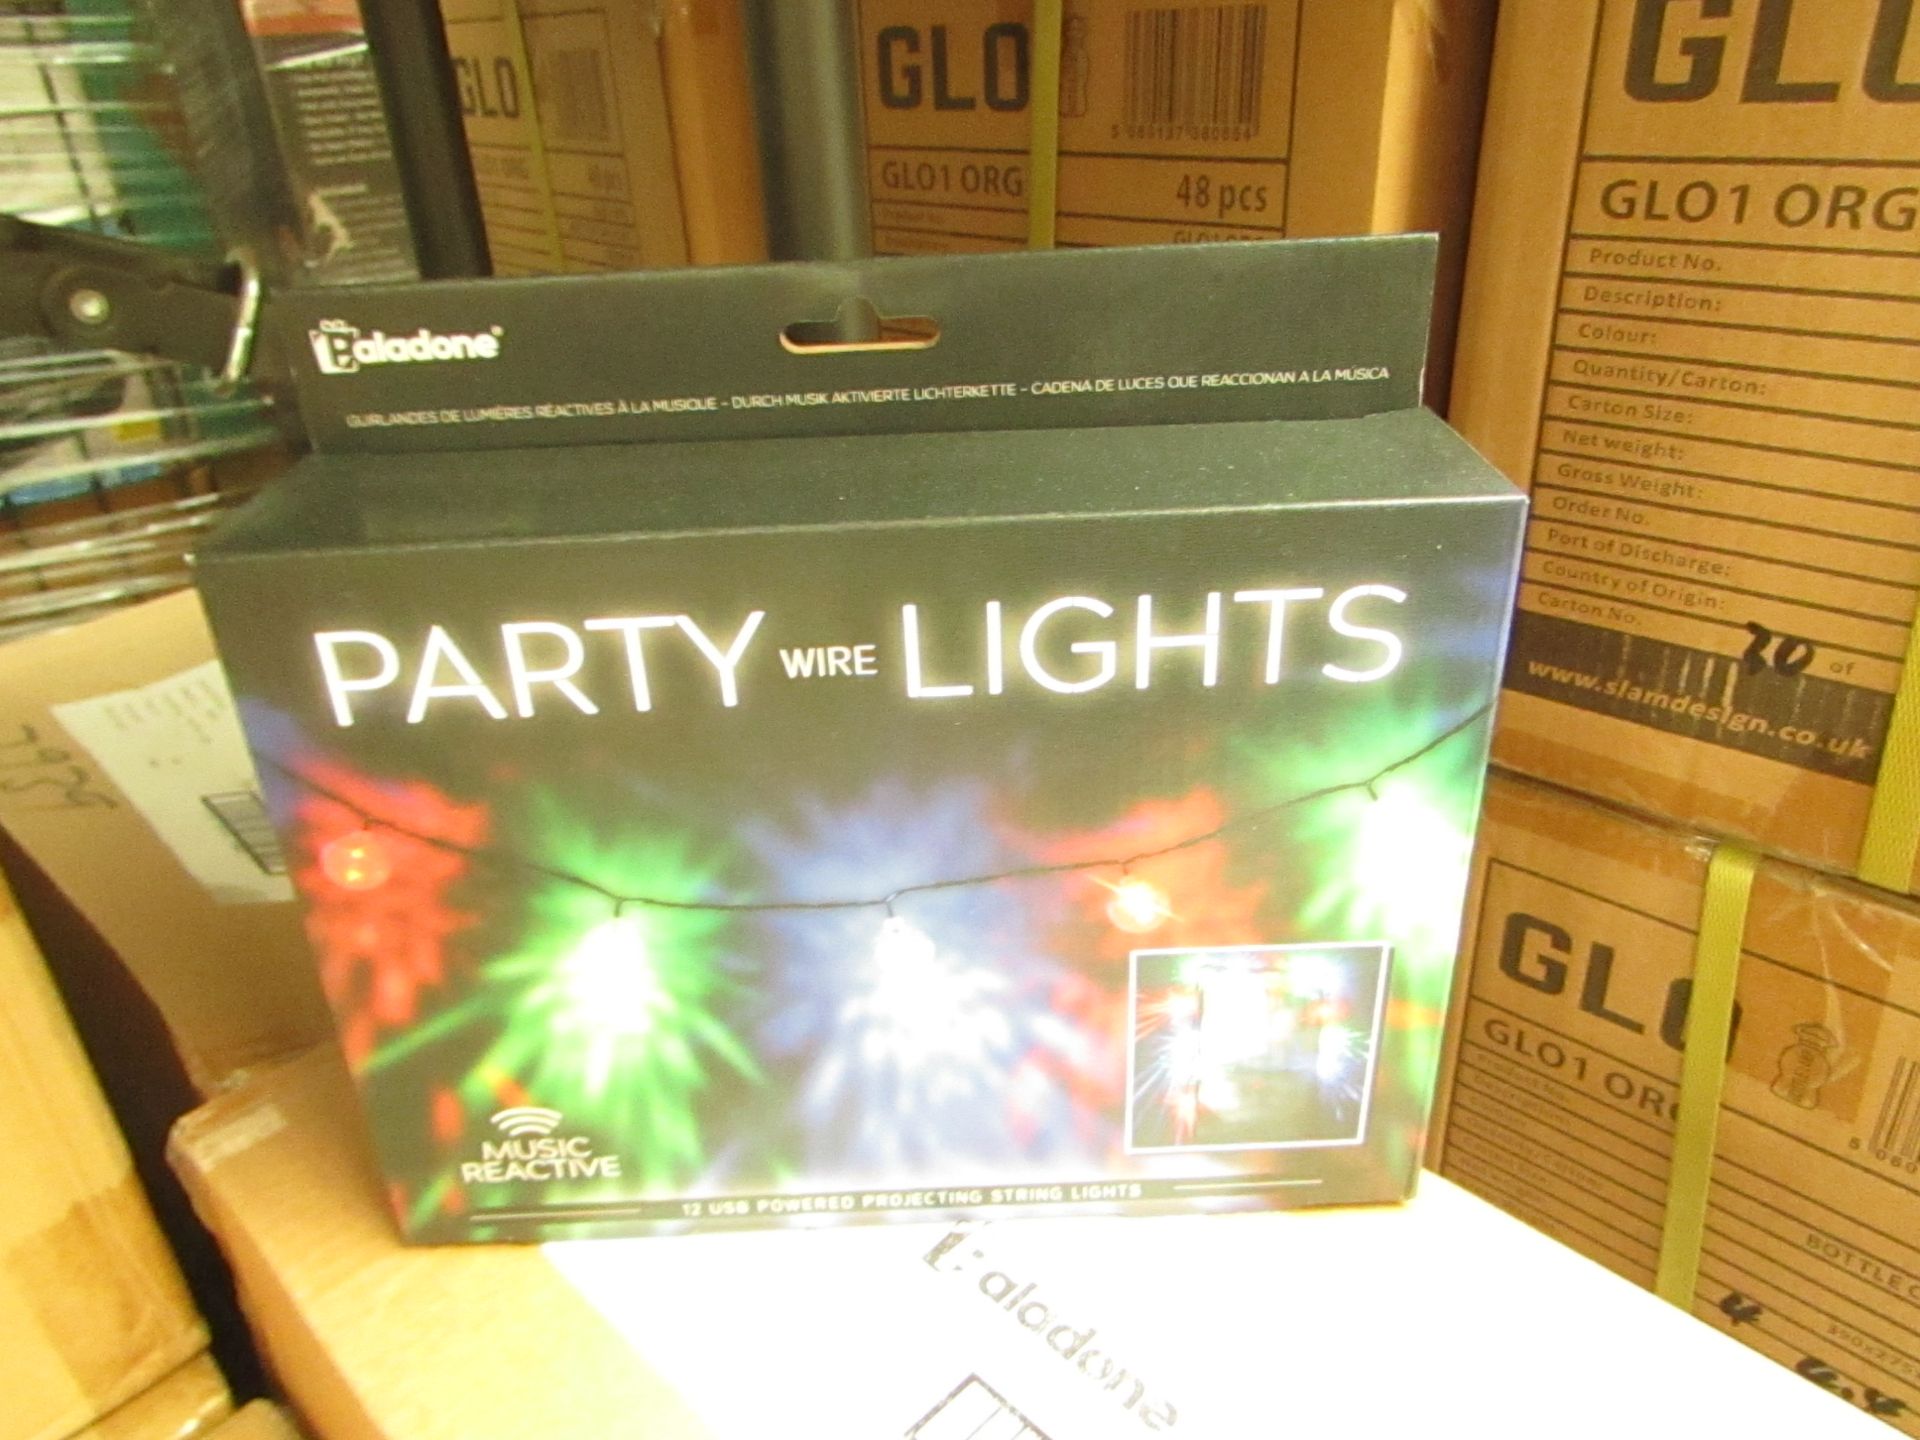 Party wire string lights, new and boxed.